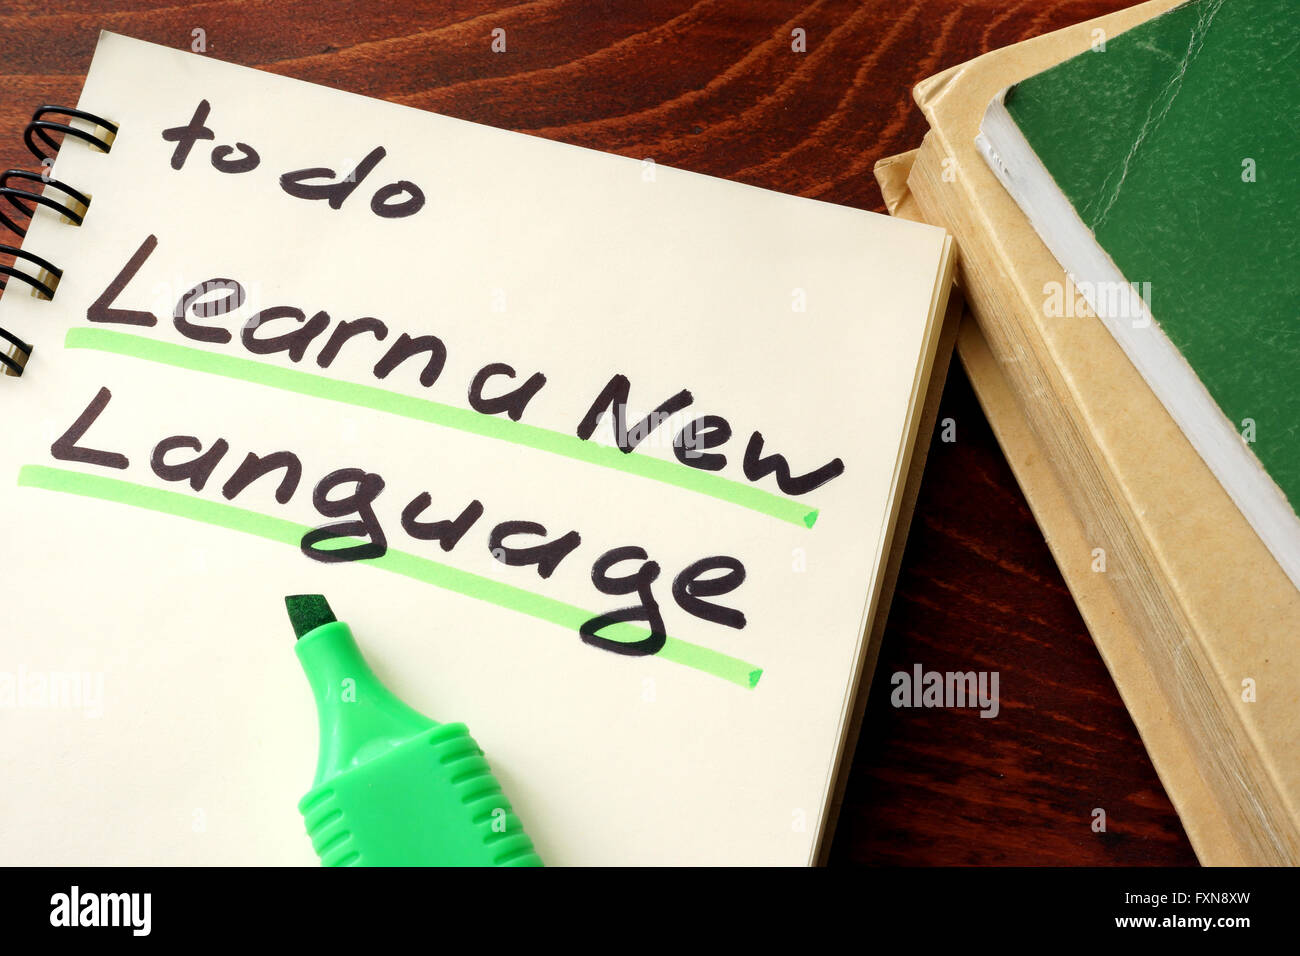 Learn a new language written on a notepad. Education concept. Stock Photo